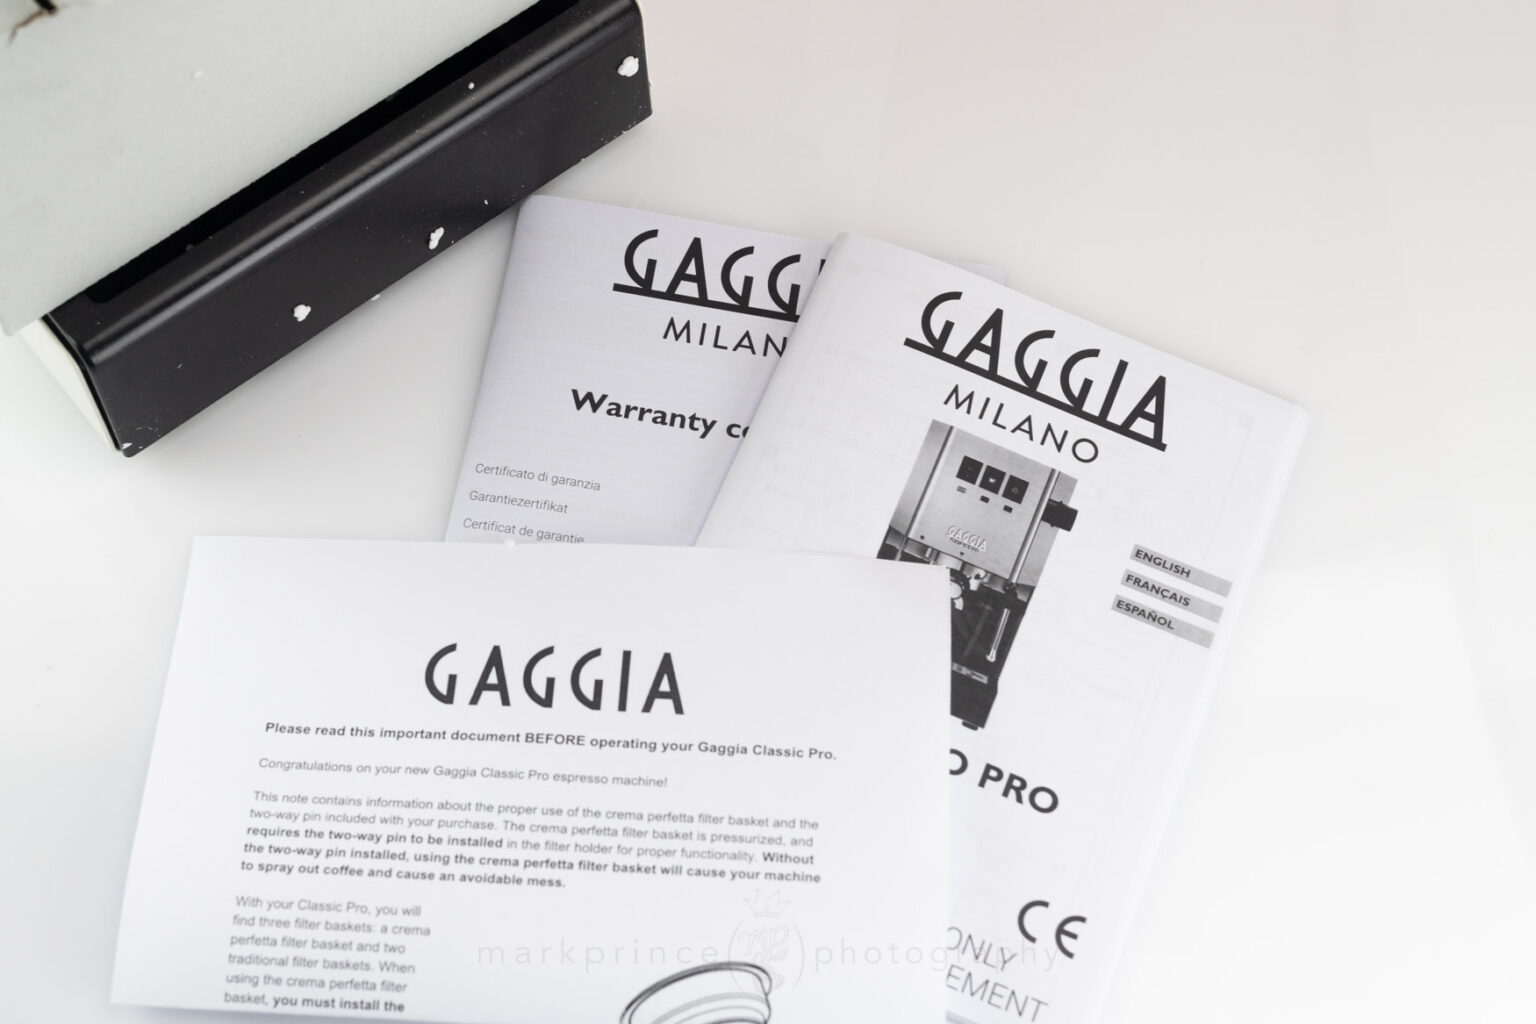 Gaggia manuals, warranty and a "read first" notice about the pressurized portafilter filter basket and plastic insert.